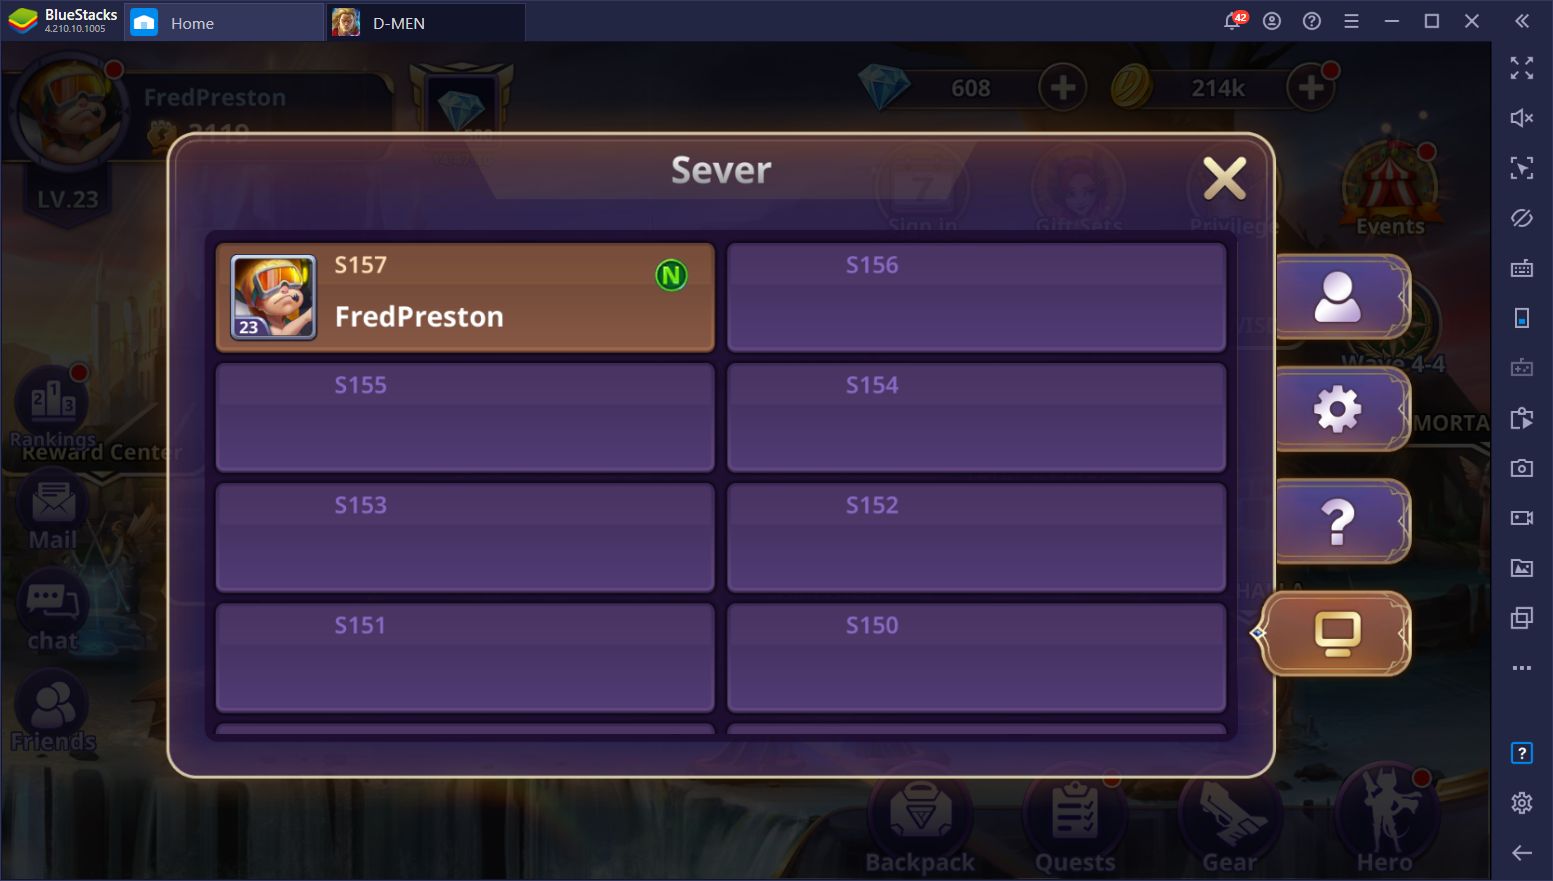 D-Men: The Defenders on PC - How to Use Our BlueStacks Tools to Win in This Tower Defense Game